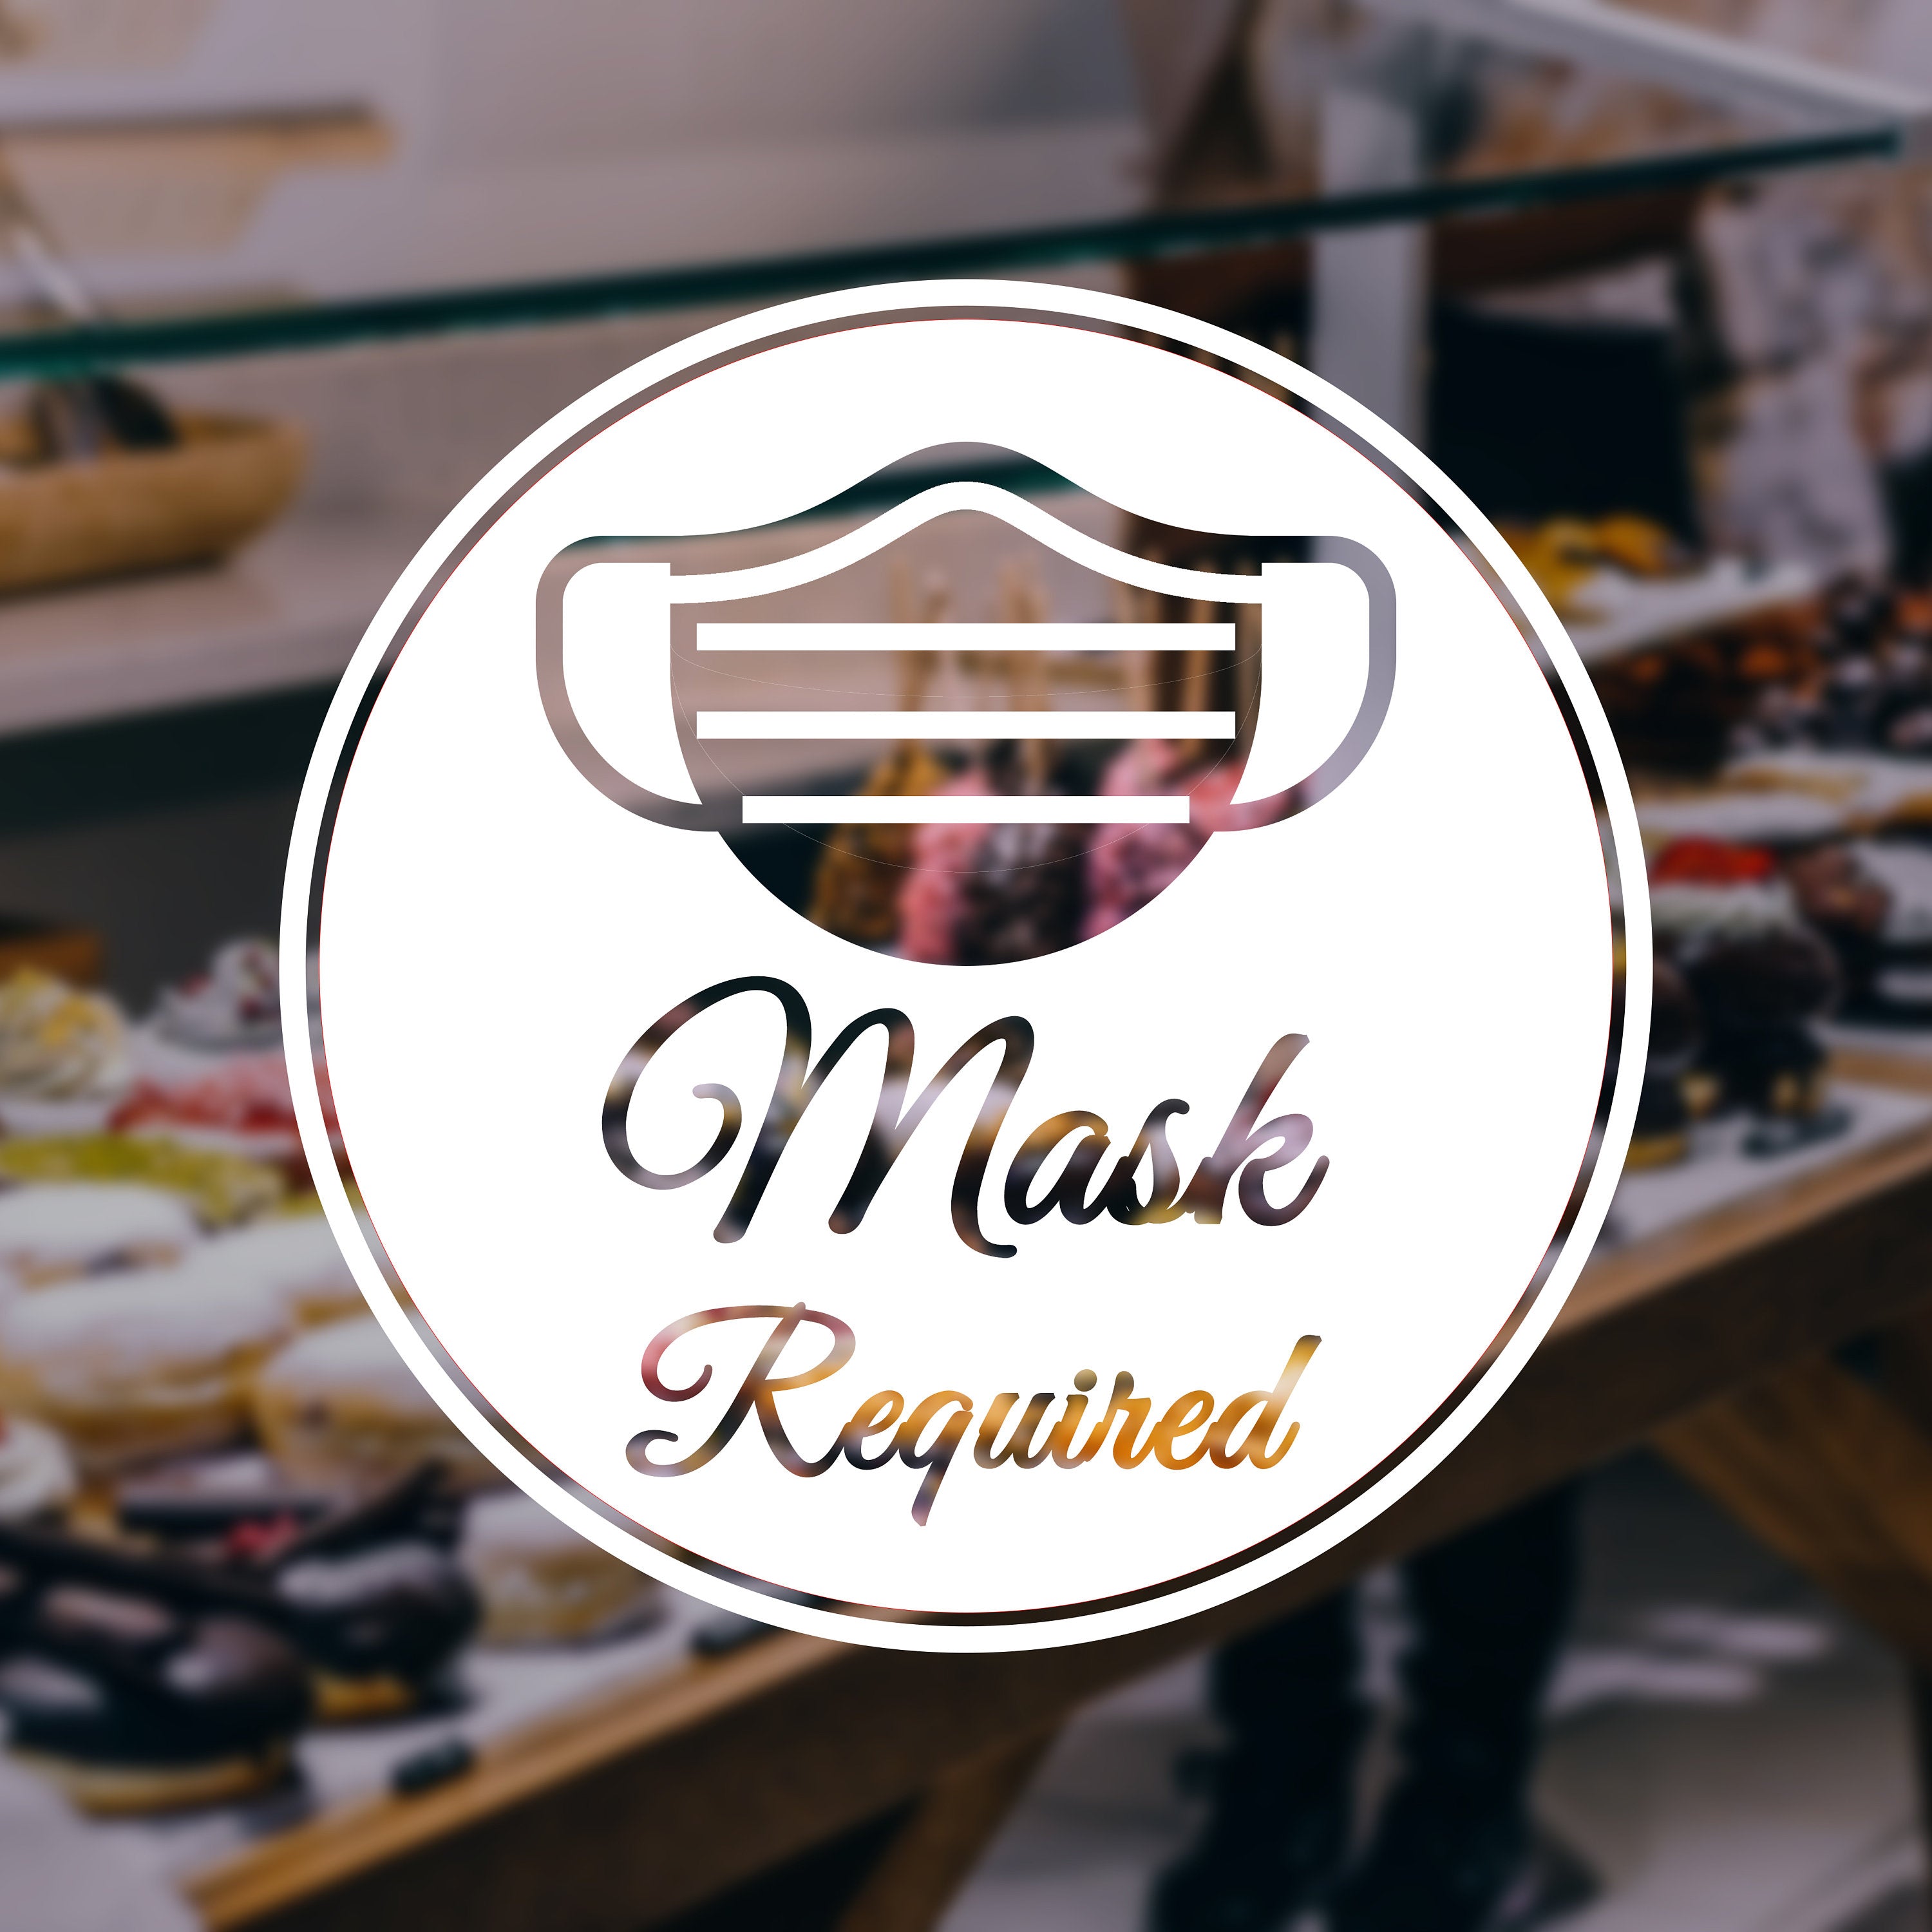 Mask Required - Face Mask Social Distancing Vinyl Decal for Windows, Doors, Walls of Small Businesses, Stores, Shops, Restaurants, and More!